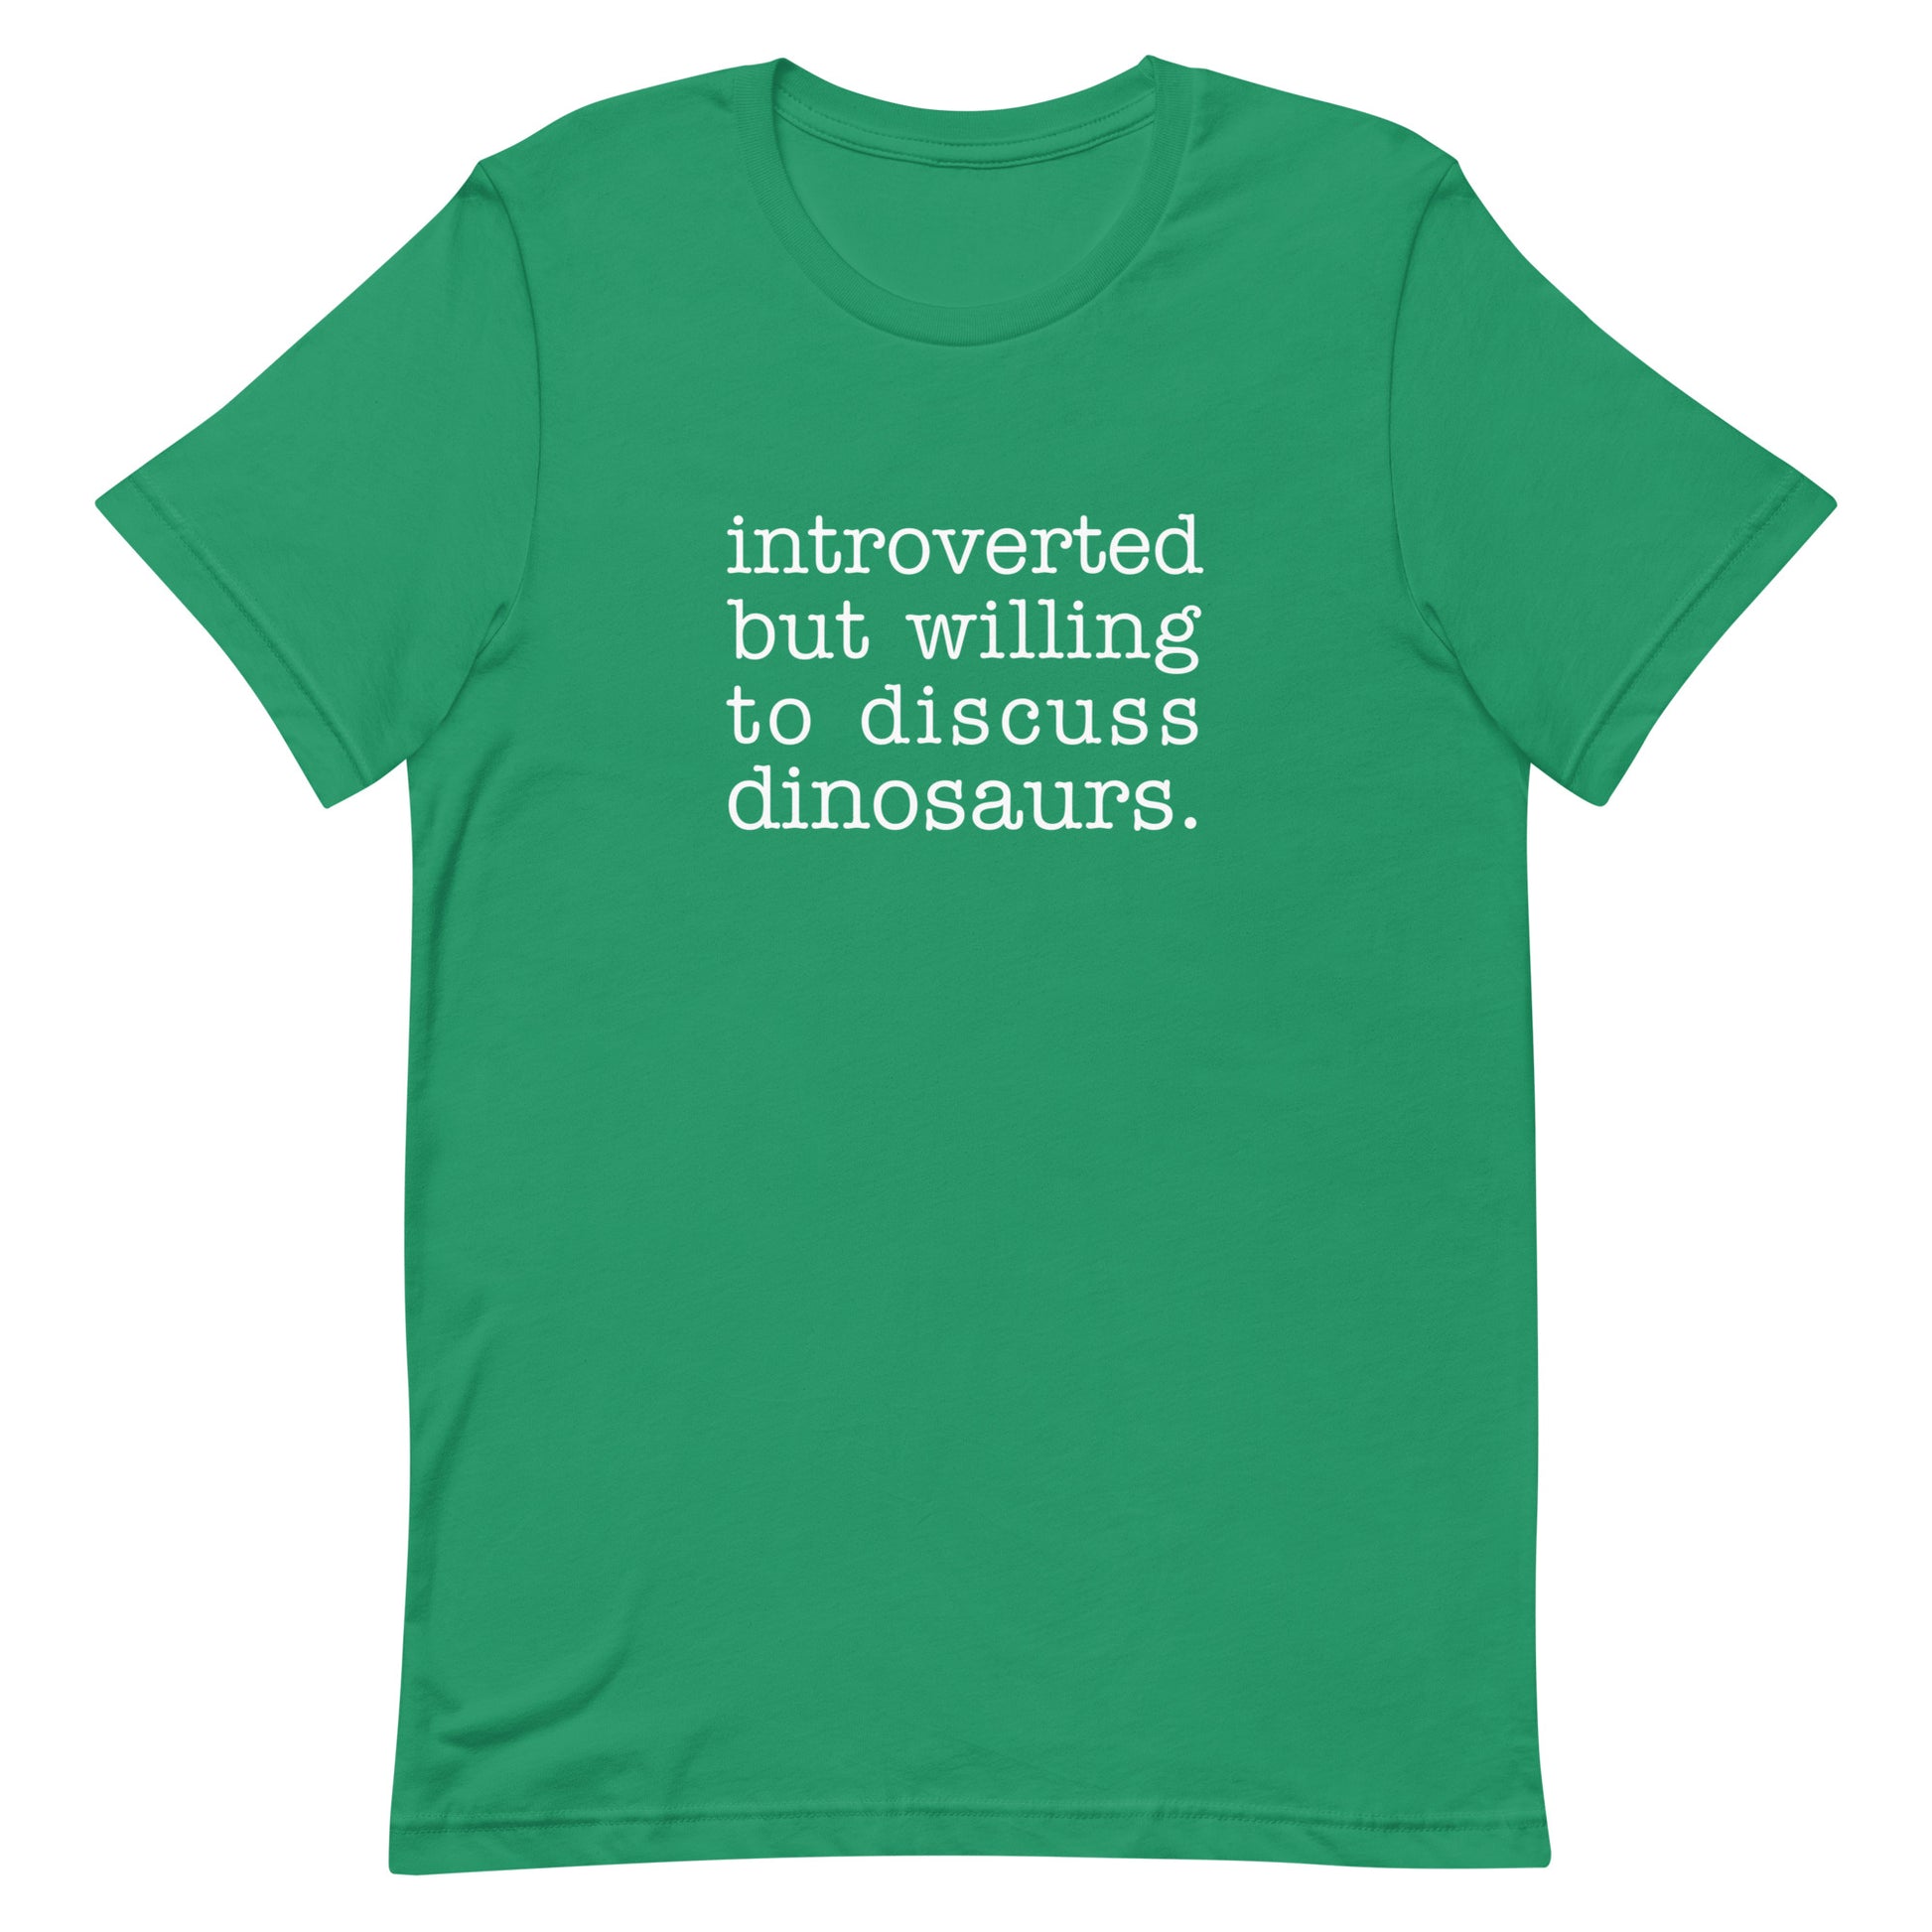 A green crewneck t-shirt with white text reading "introverted but willing to discuss dinosaurs"